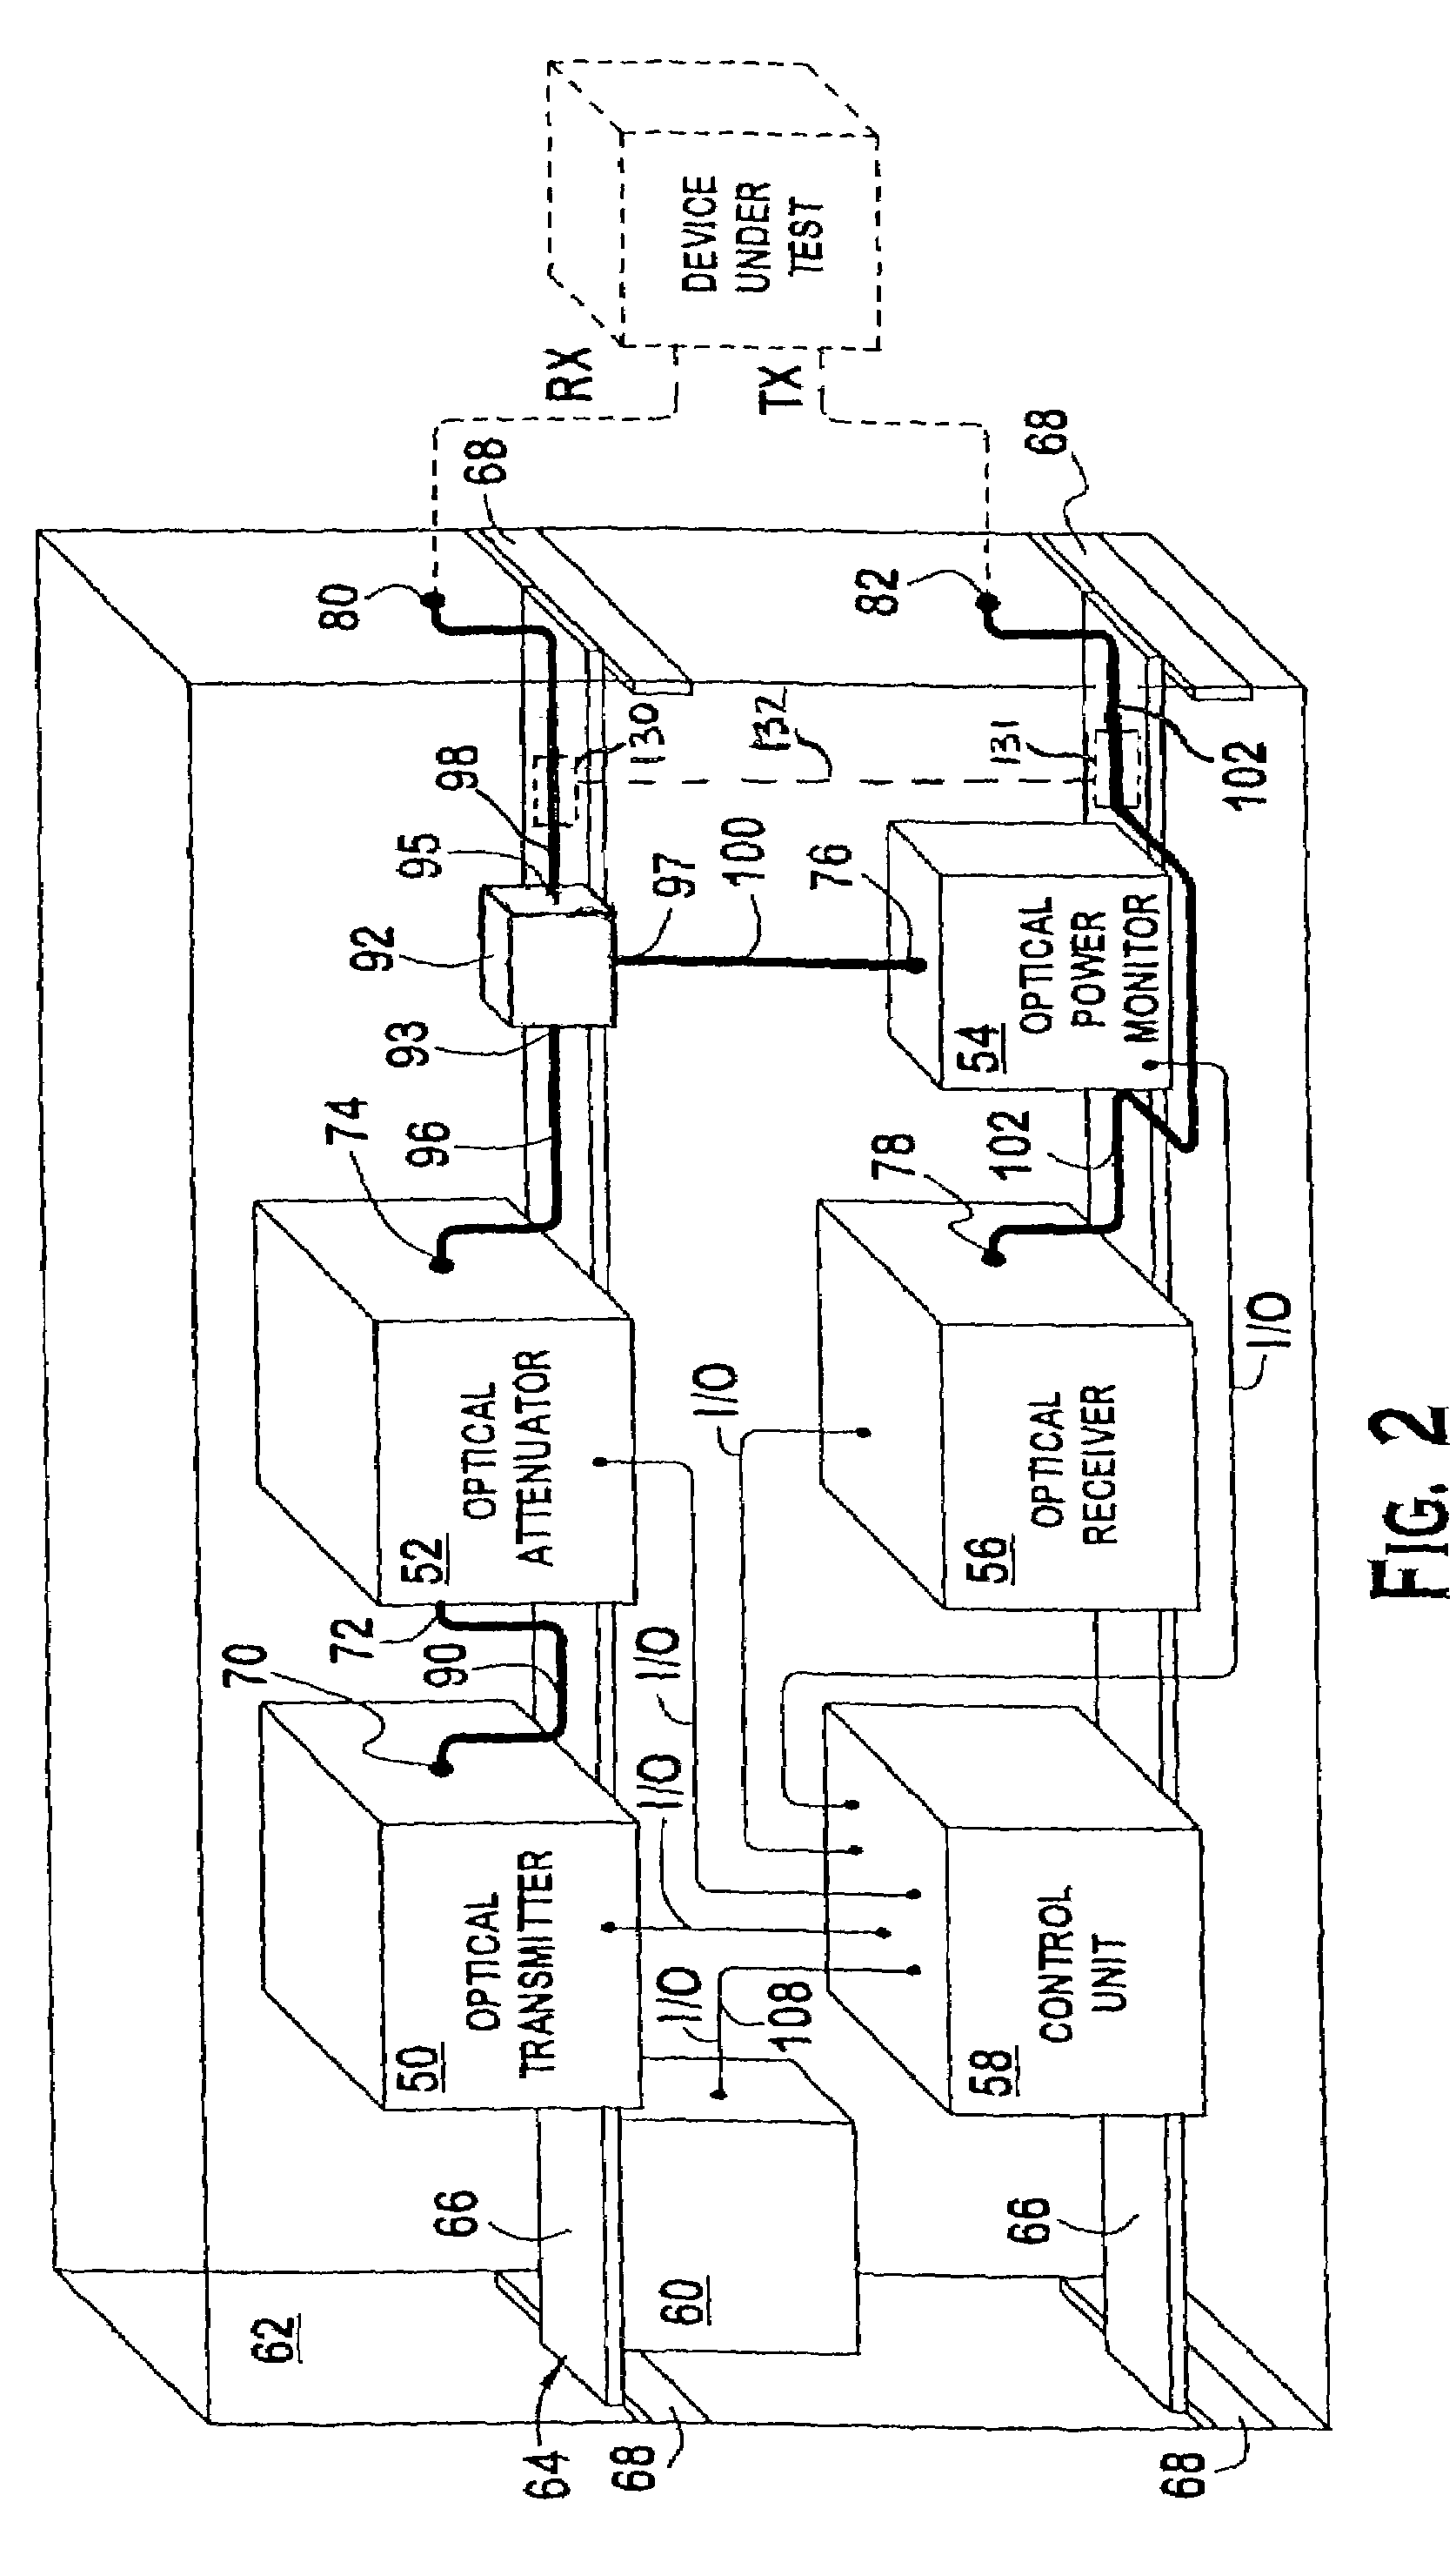 Unitary testing apparatus for performing bit error rate measurements on optical components